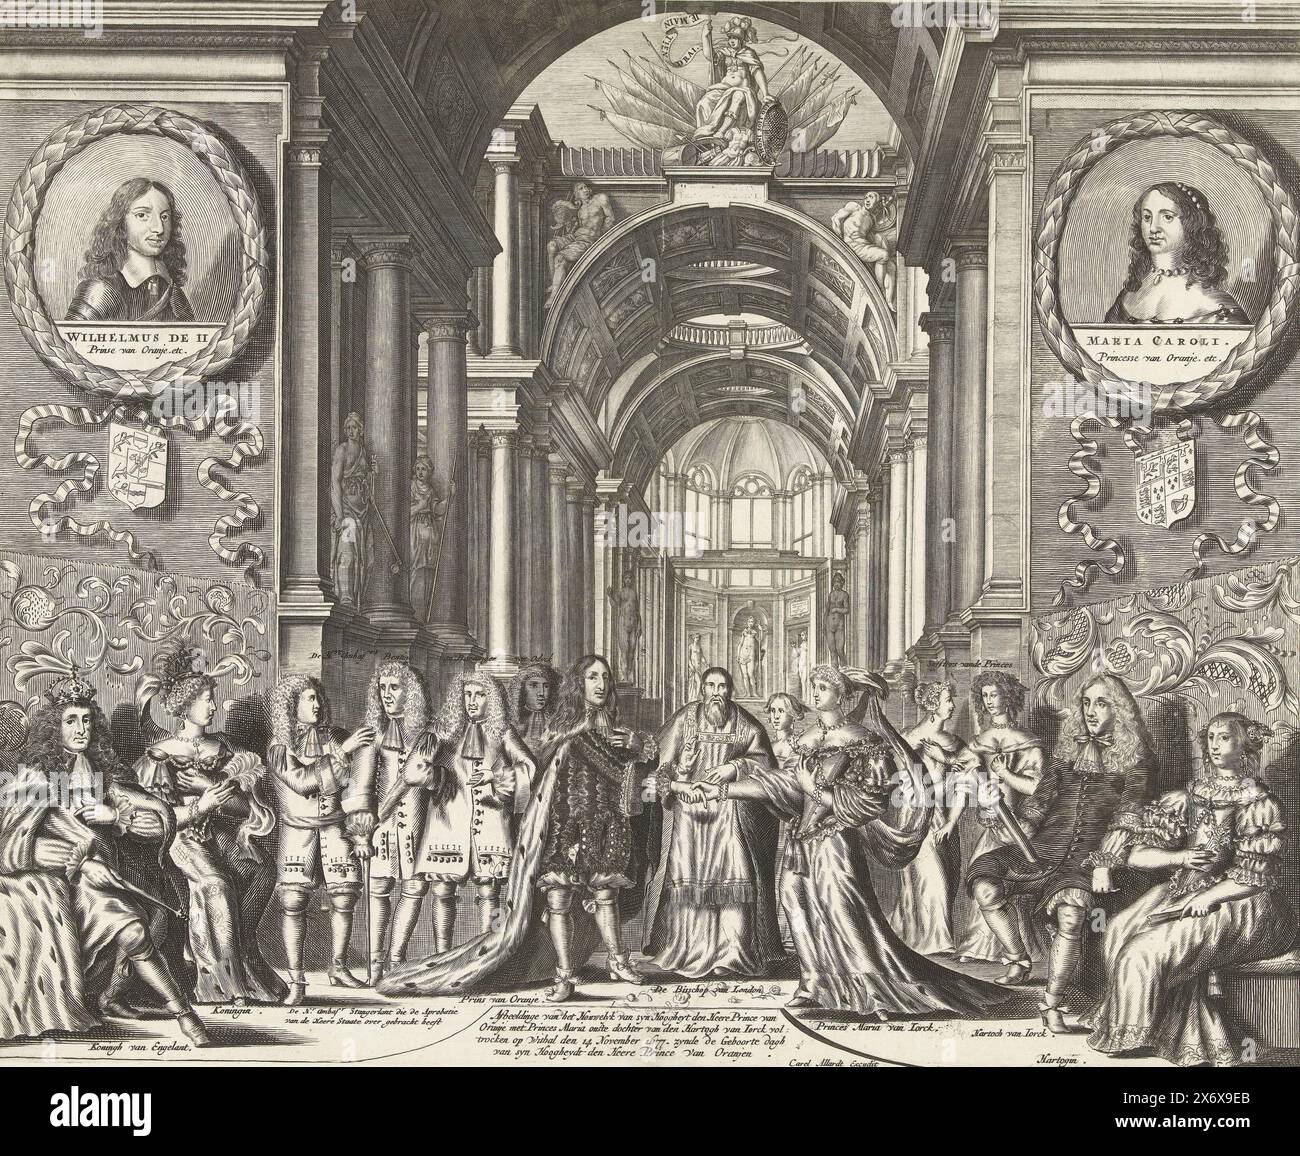 Marriage of Prince Willem III to Maria Stuart, 1677, Image of the Houwelyk van syn Hoogheyt den Heere Prince of Orange with Princes Maria, eldest daughter of Hartogh van Jorck, took place on Withal on November 14, 1677, being the Birth Day of syn Hoogheydt den Heere Prince van Oranjen (title on object), The marriage of Prince William III to Maria II Stuart in Whitehall in London, November 14, 1677. The ceremony was performed by the Bishop of London. On the left, Charles II, King of England with queen, on the right, James II, the Duke of York with the duchess. At the top in medallions Stock Photo